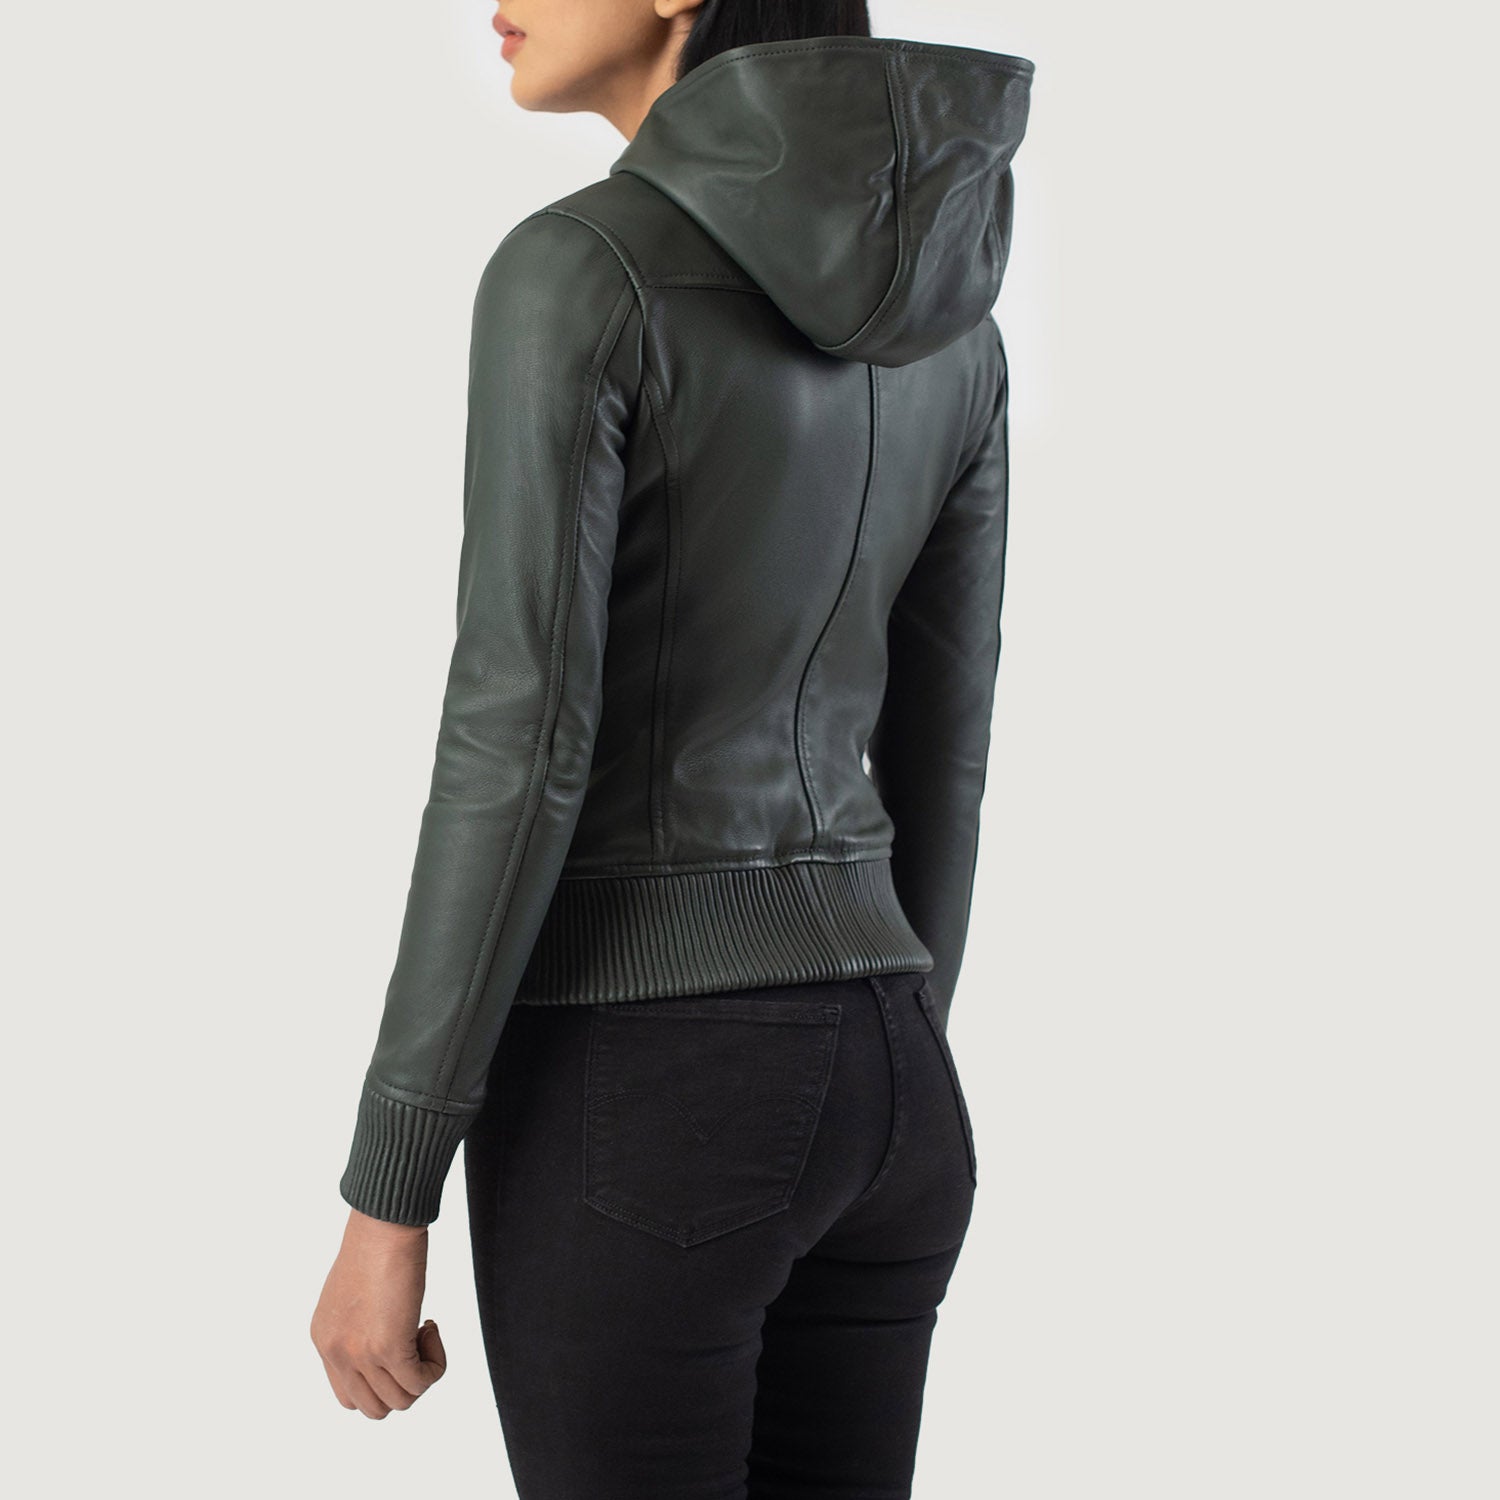 Womens A1 Green Hooded Leather Bomber Jacket - Hooded Jacket Leather Jacket Biker Jacket Womens Bomber Jacket Women's A1 Green Hooded Leather Bomber Jacket, Hooded Women's Leather Bomber Jacket, Stylish Women's Green Bomber Jacket, Premium Quality Leather Jacket for Women, Durable Green Leather Jacket for Women, Fashionable Hooded Bomber Jacket for Women, High-Quality Women's Leather Outerwear, Trendy Women's Leather Bomber Jacket, Green Leather Jacket with Hood, Women's Fashion Leather Jacket